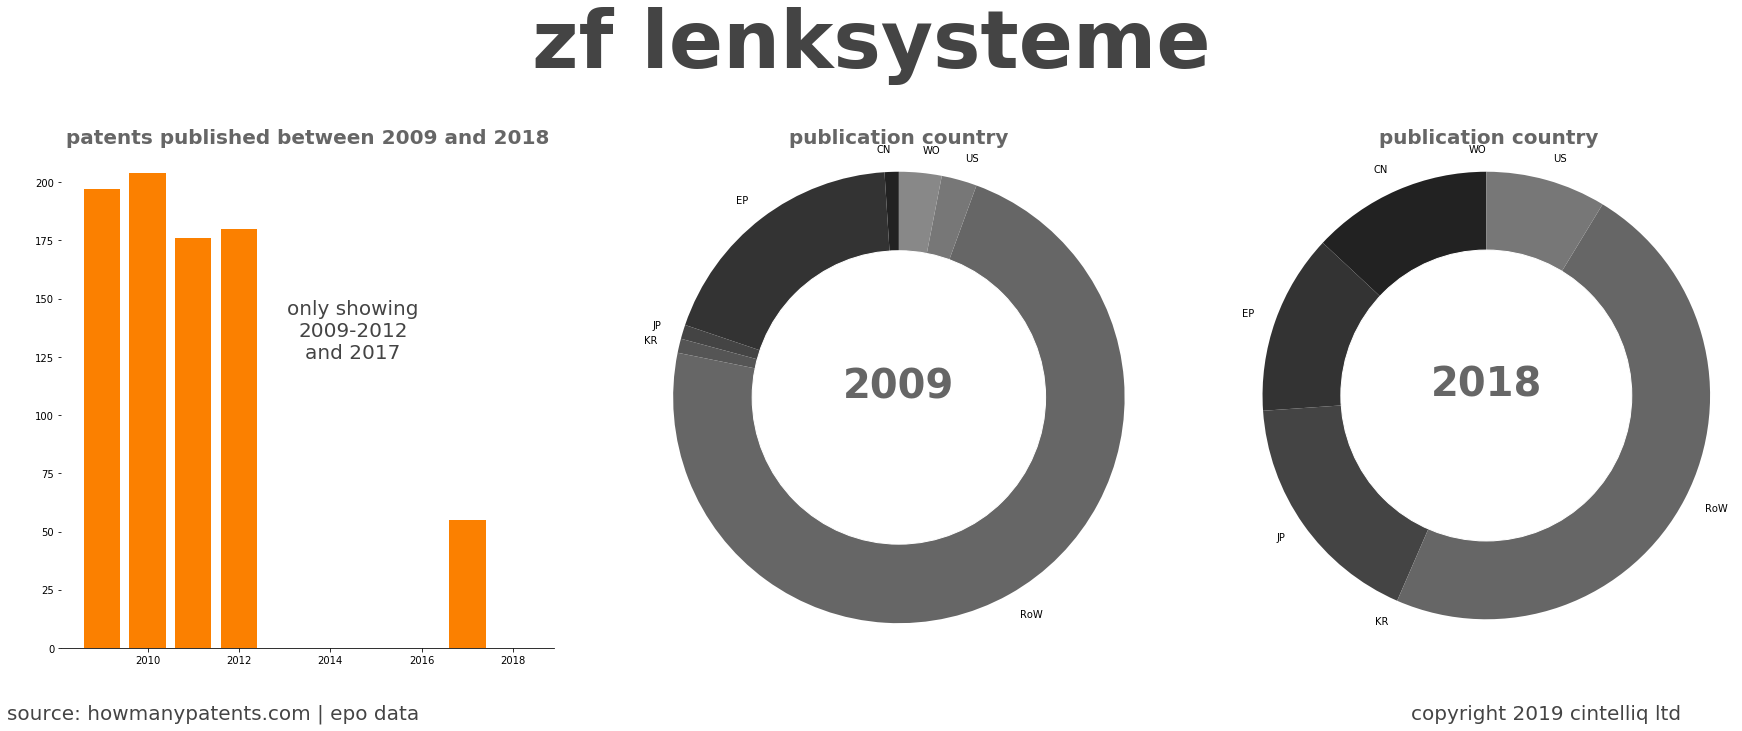 summary of patents for Zf Lenksysteme